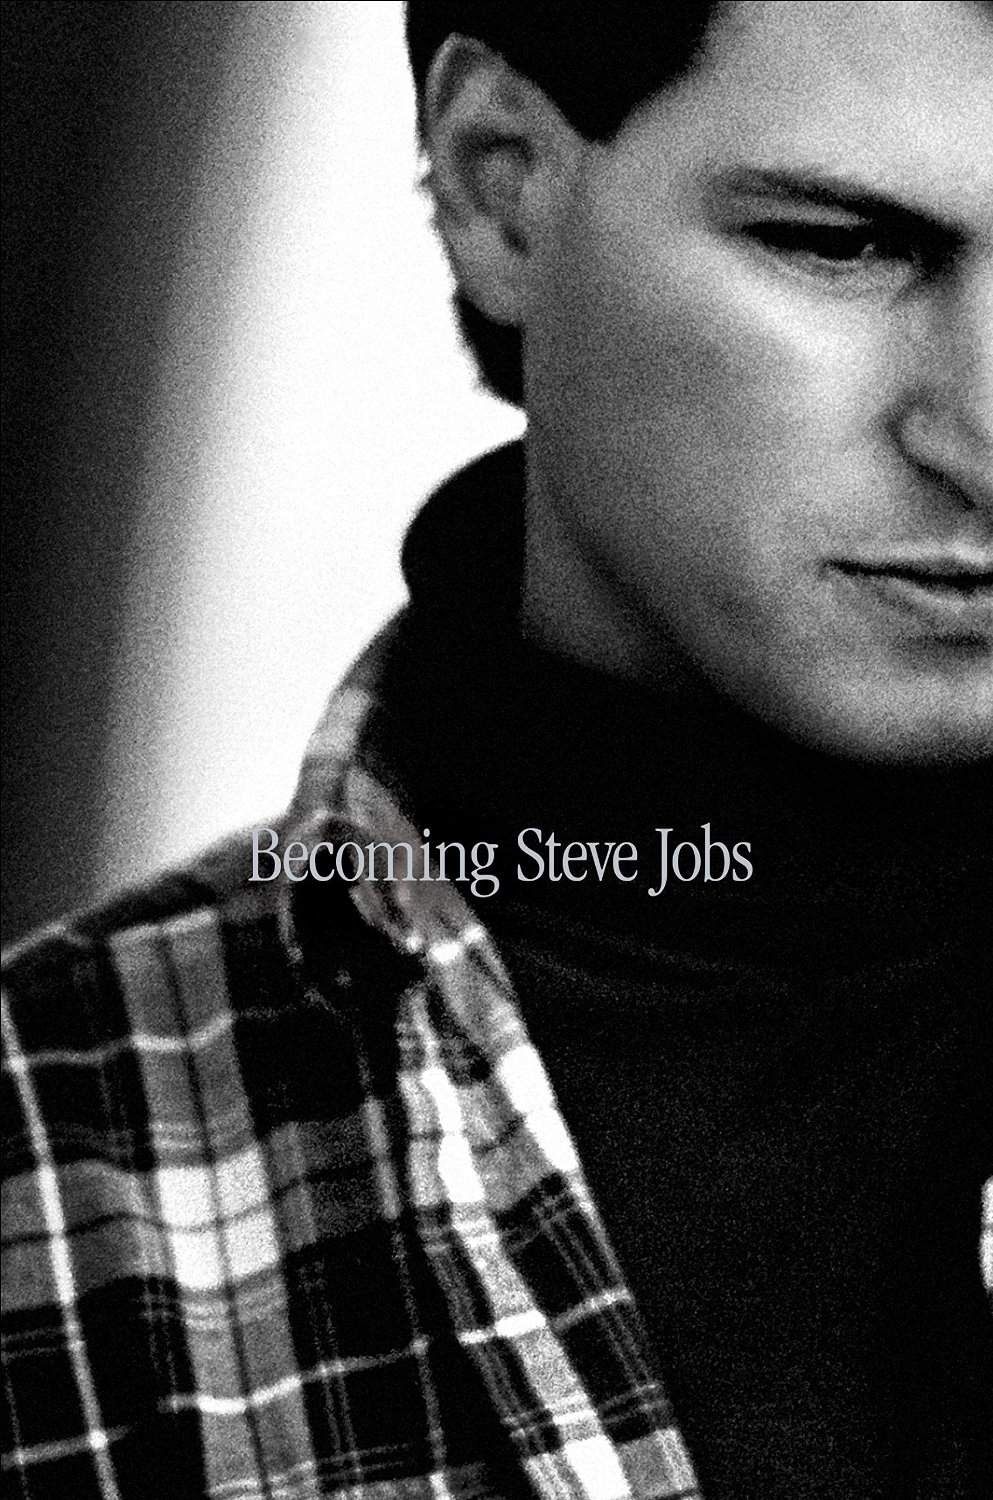 Apple Says It Felt a &#039;Sense of Responsibility&#039; to Participate in New Steve Jobs Book